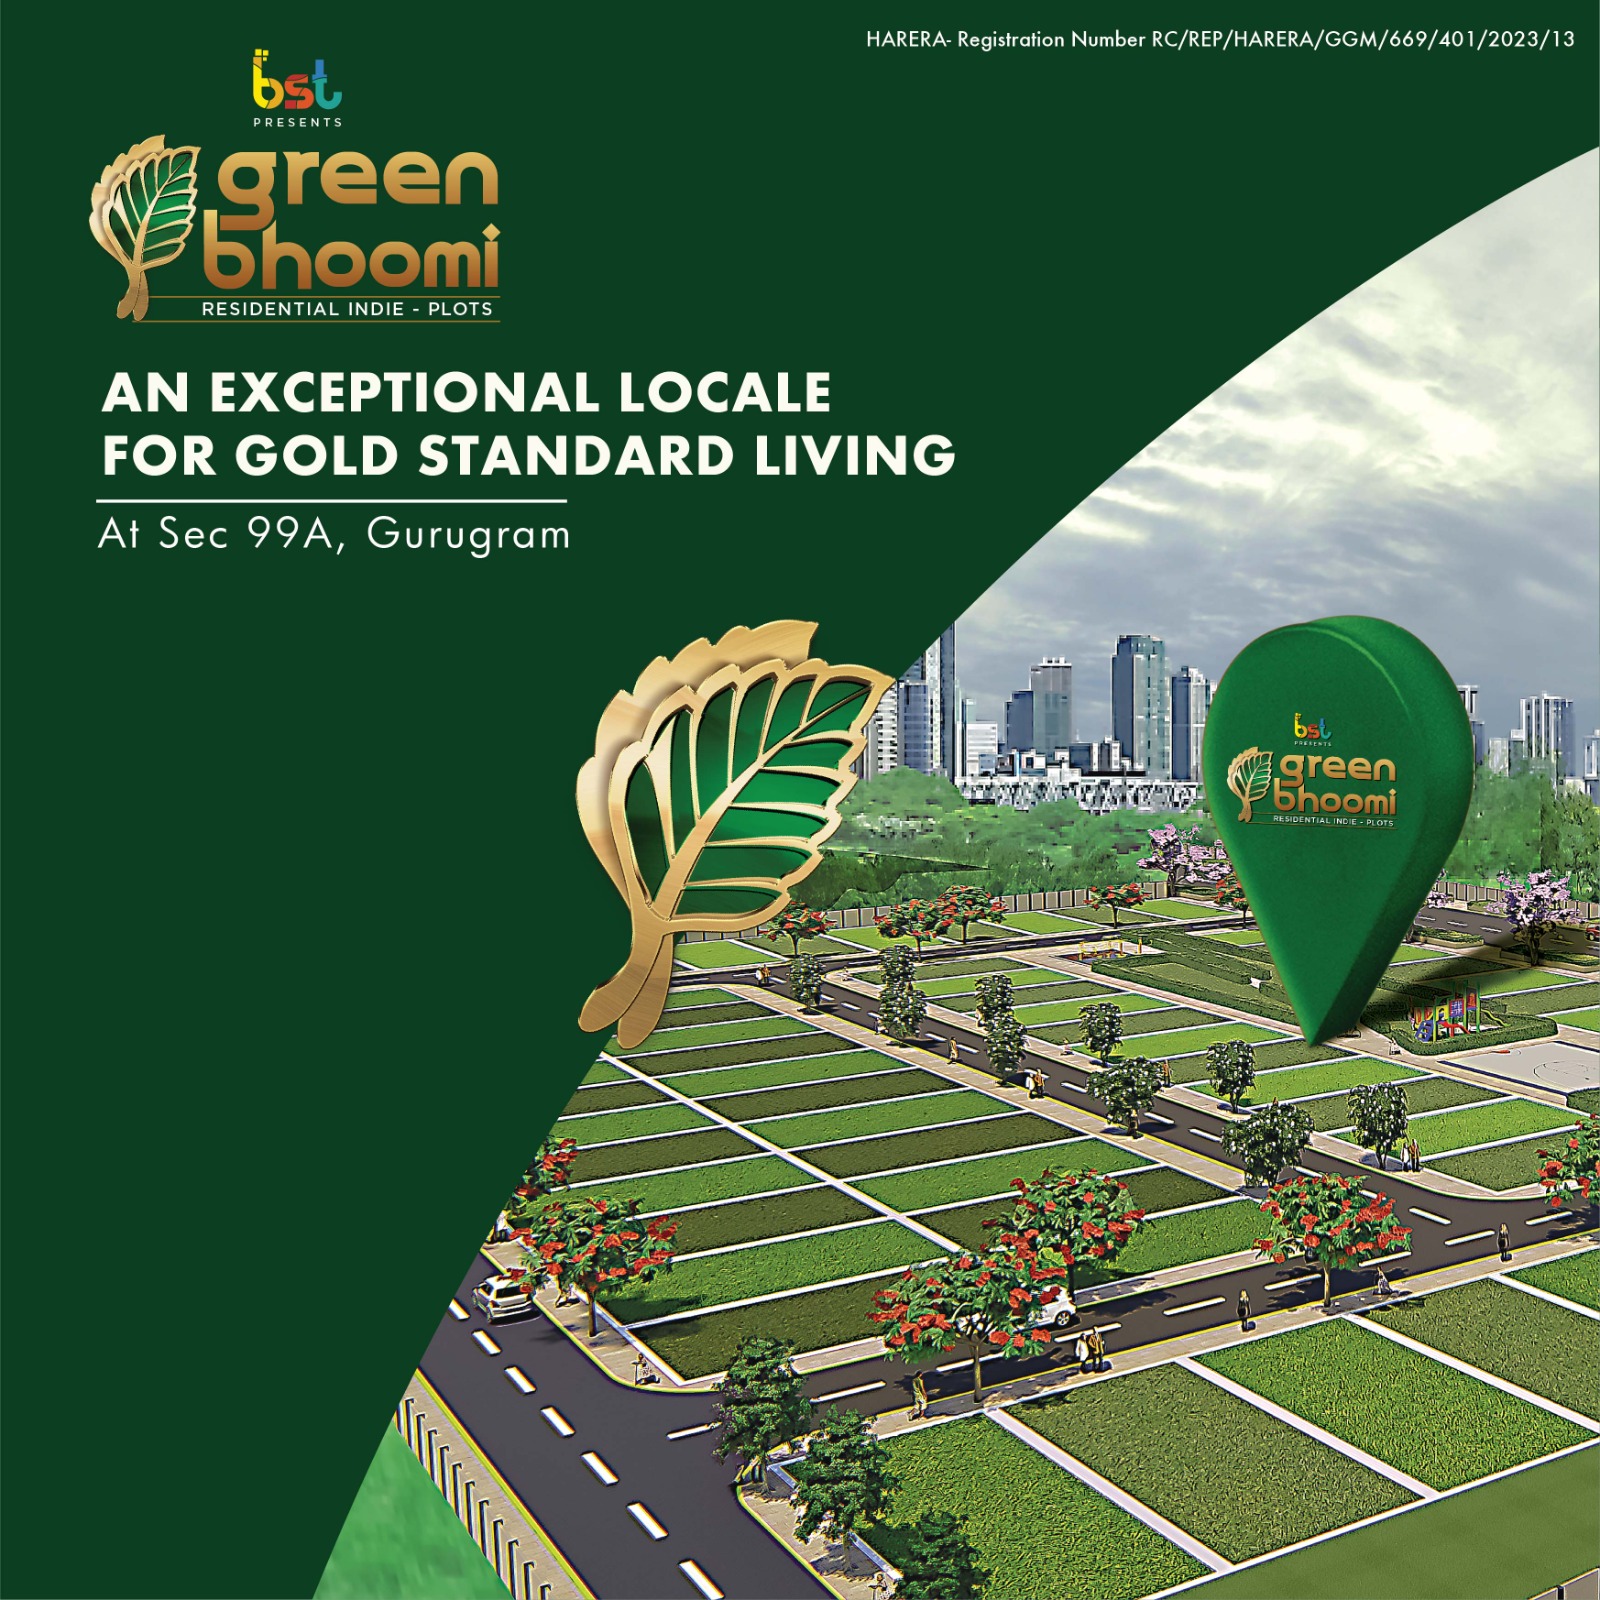 BST Green Bhoomi Plots an exceptional locale for gold standard living at Sector 99A, Gurgaon Update